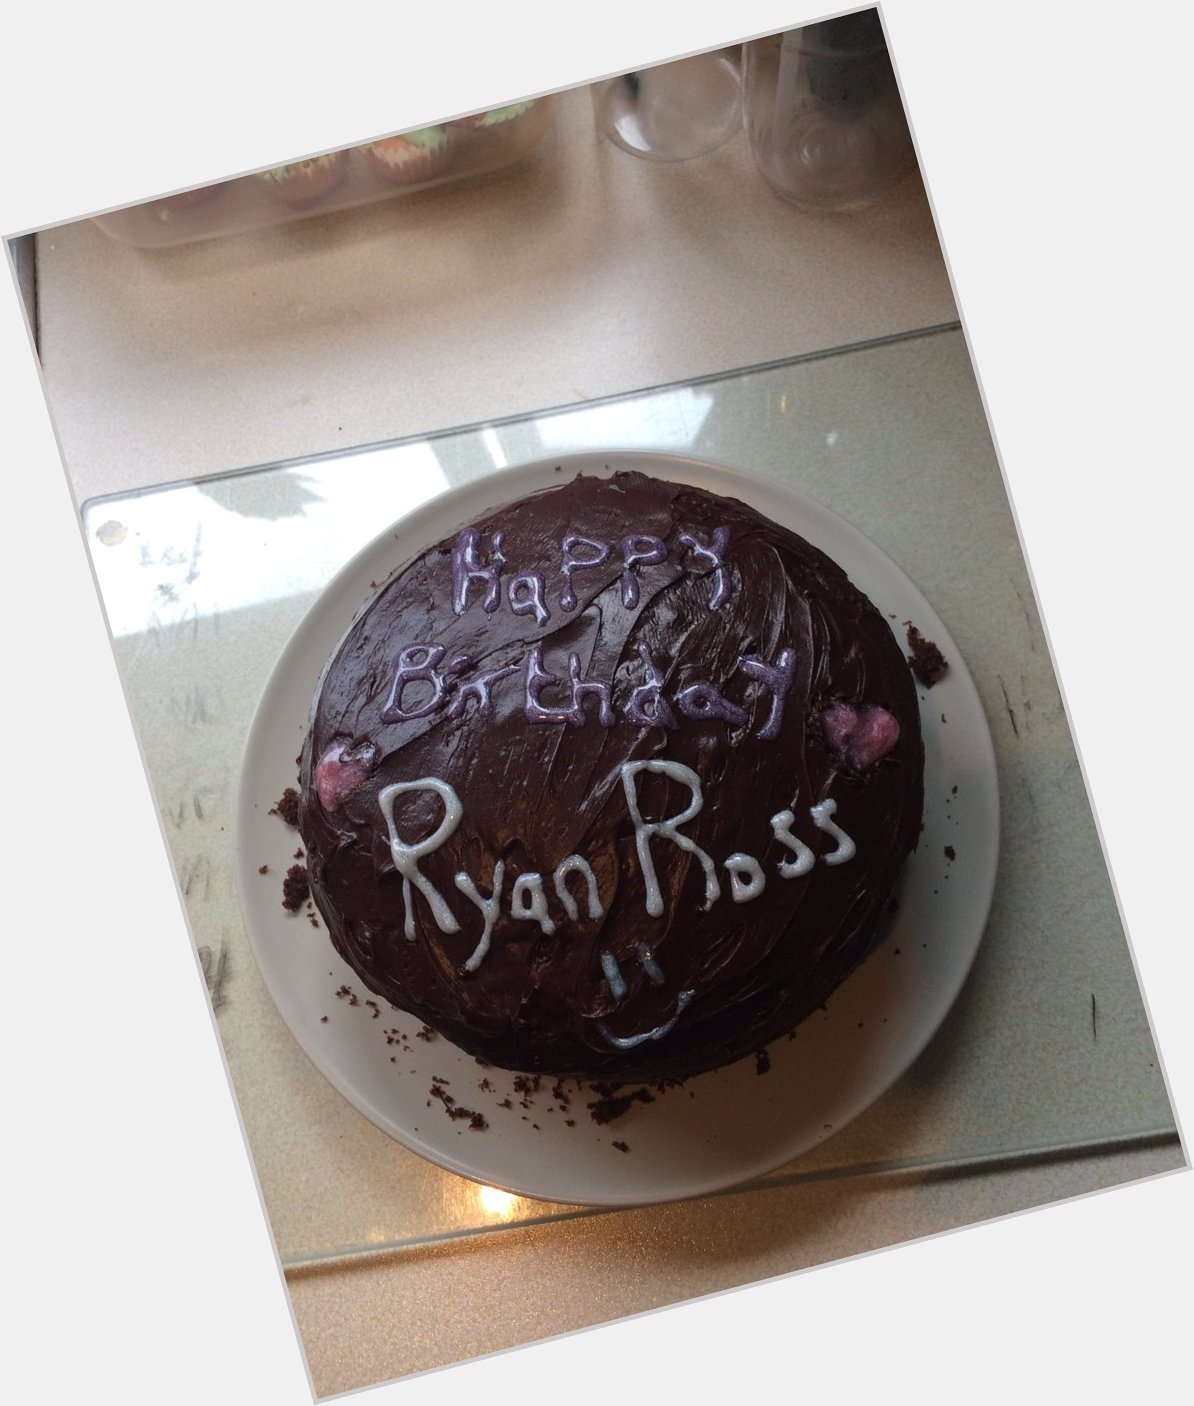  yes. Me and my sister decided to make a cake   Again, happy birthday Ryan Ross 